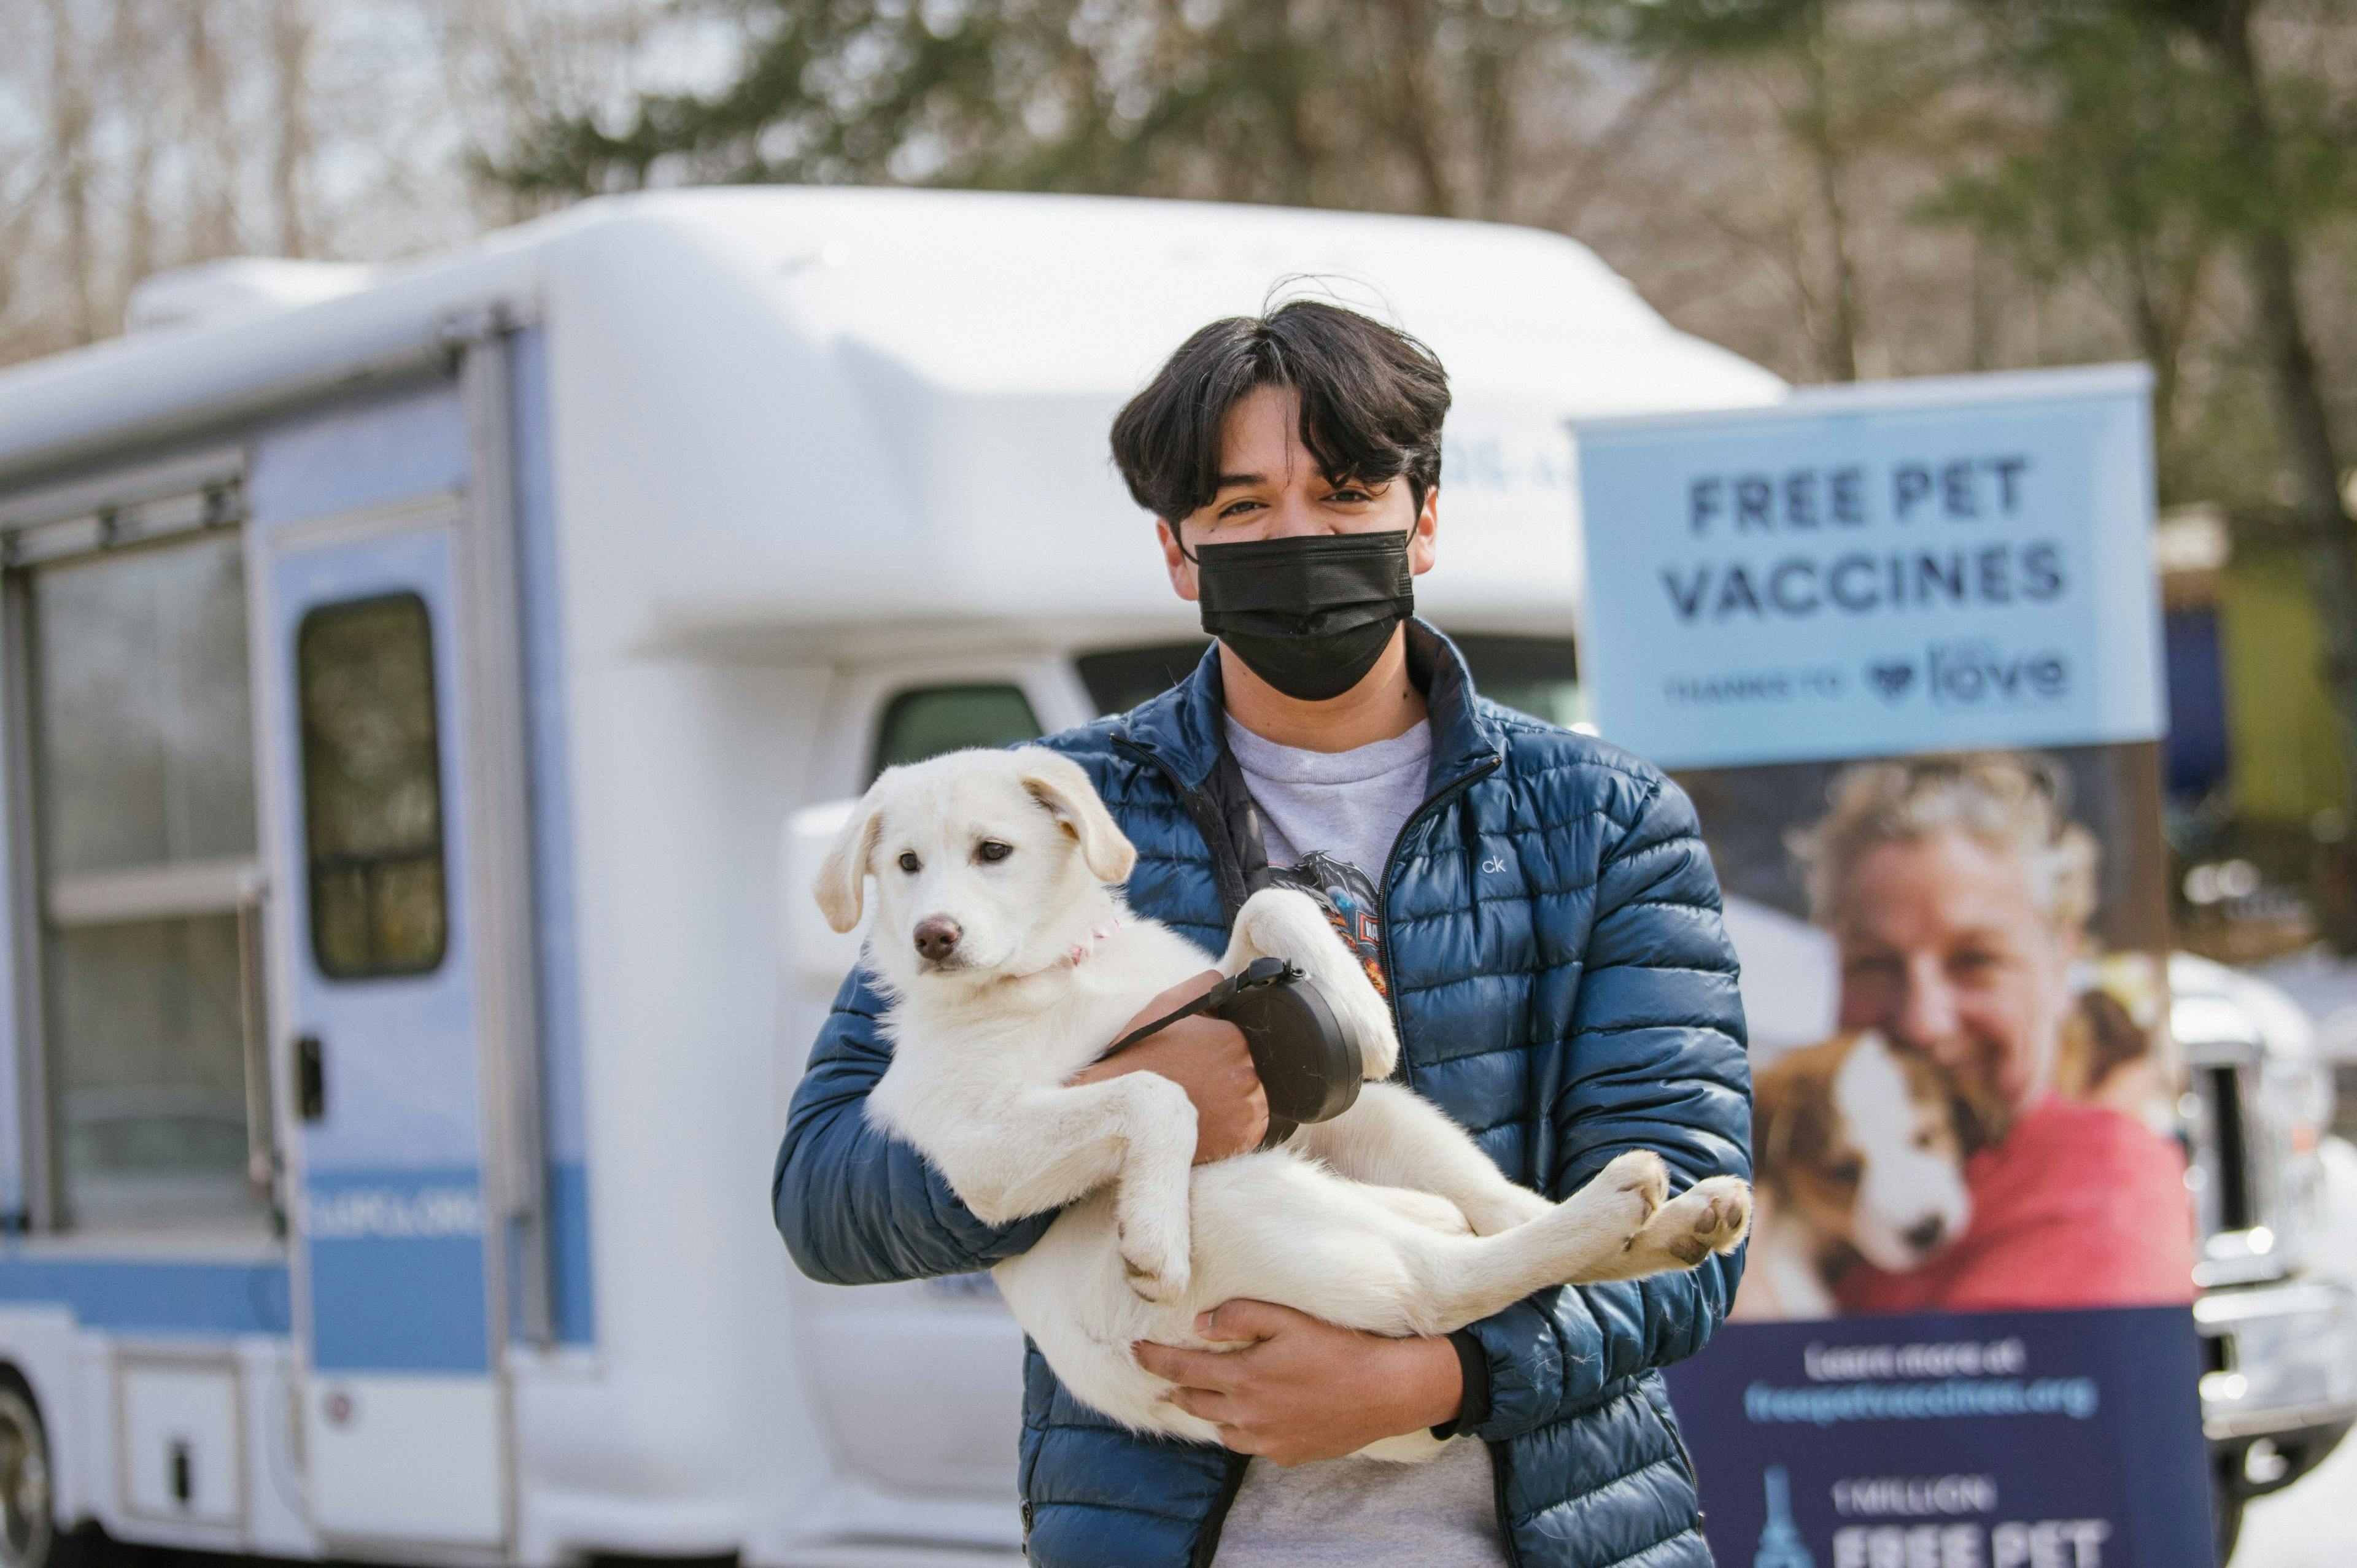 National organizations are offering free pet vaccinations in March